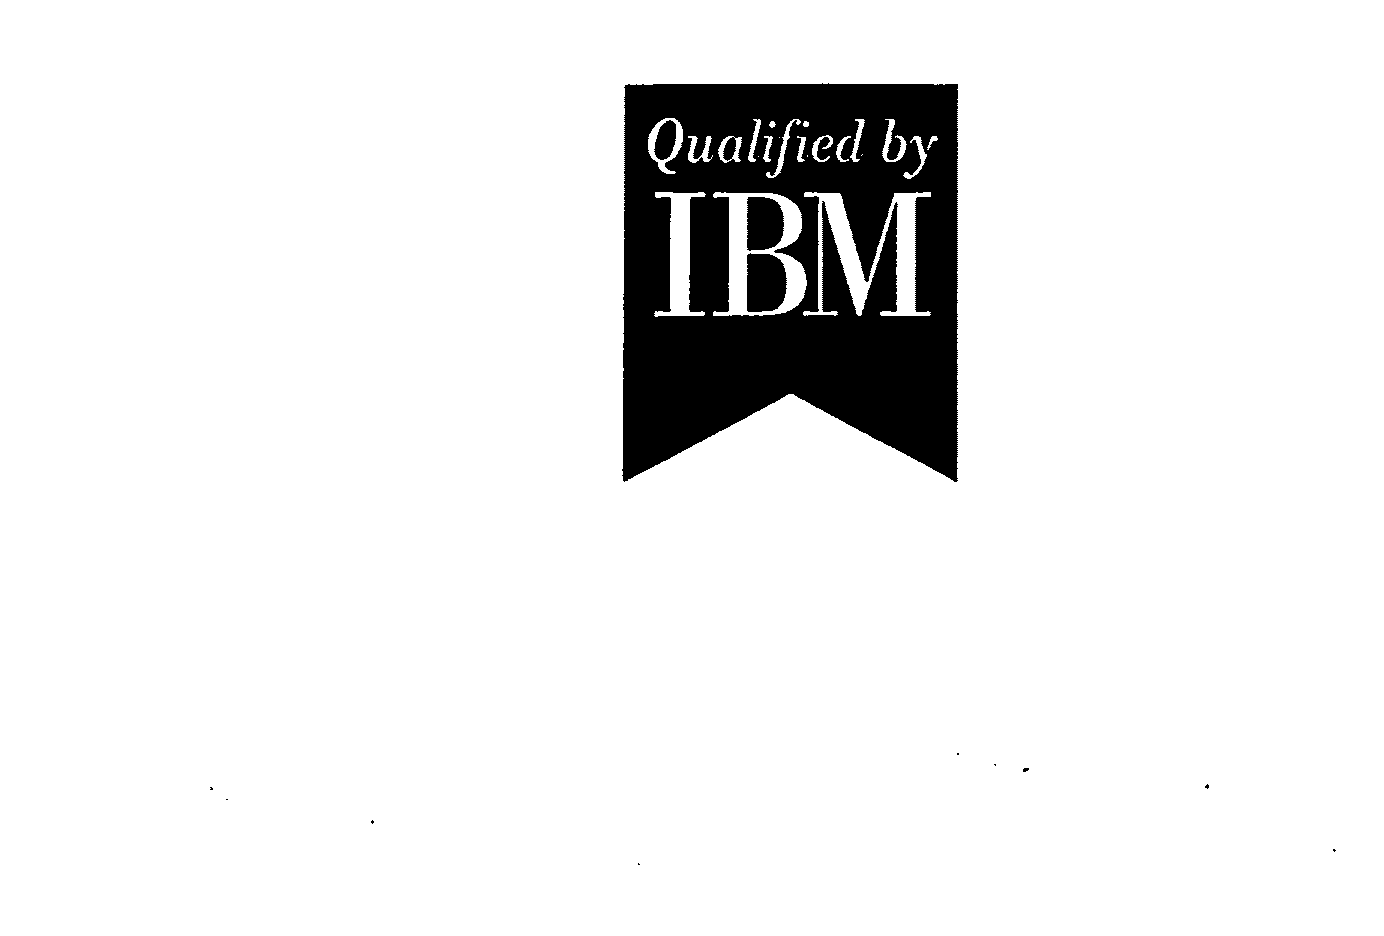  QUALIFIED BY IBM